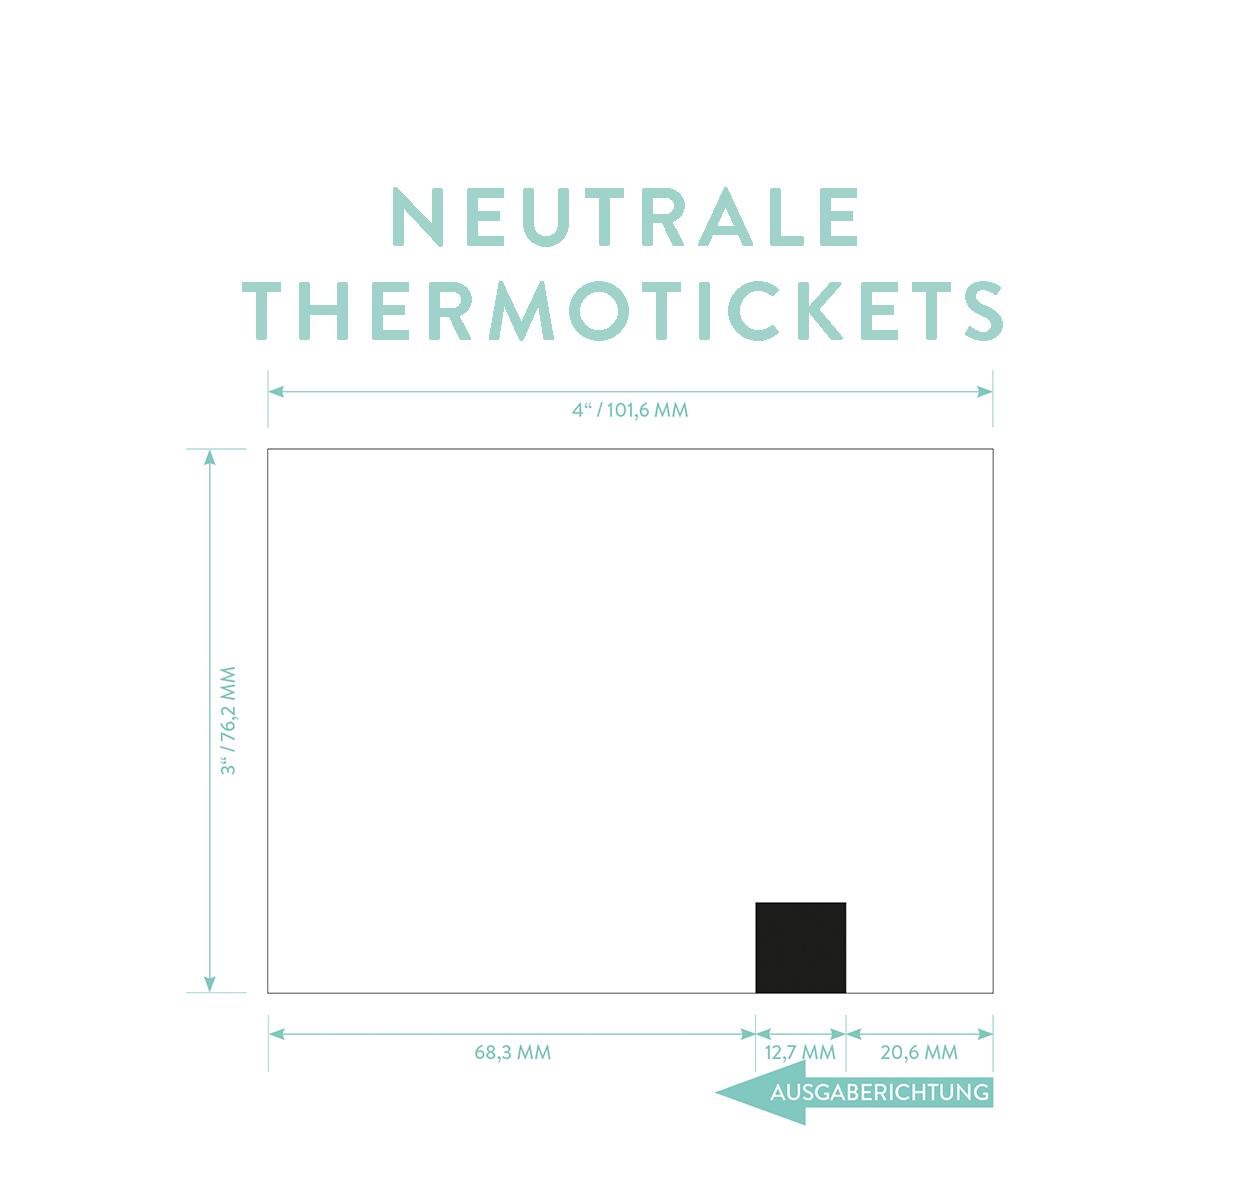 Kategorie neutrale Thermotickets